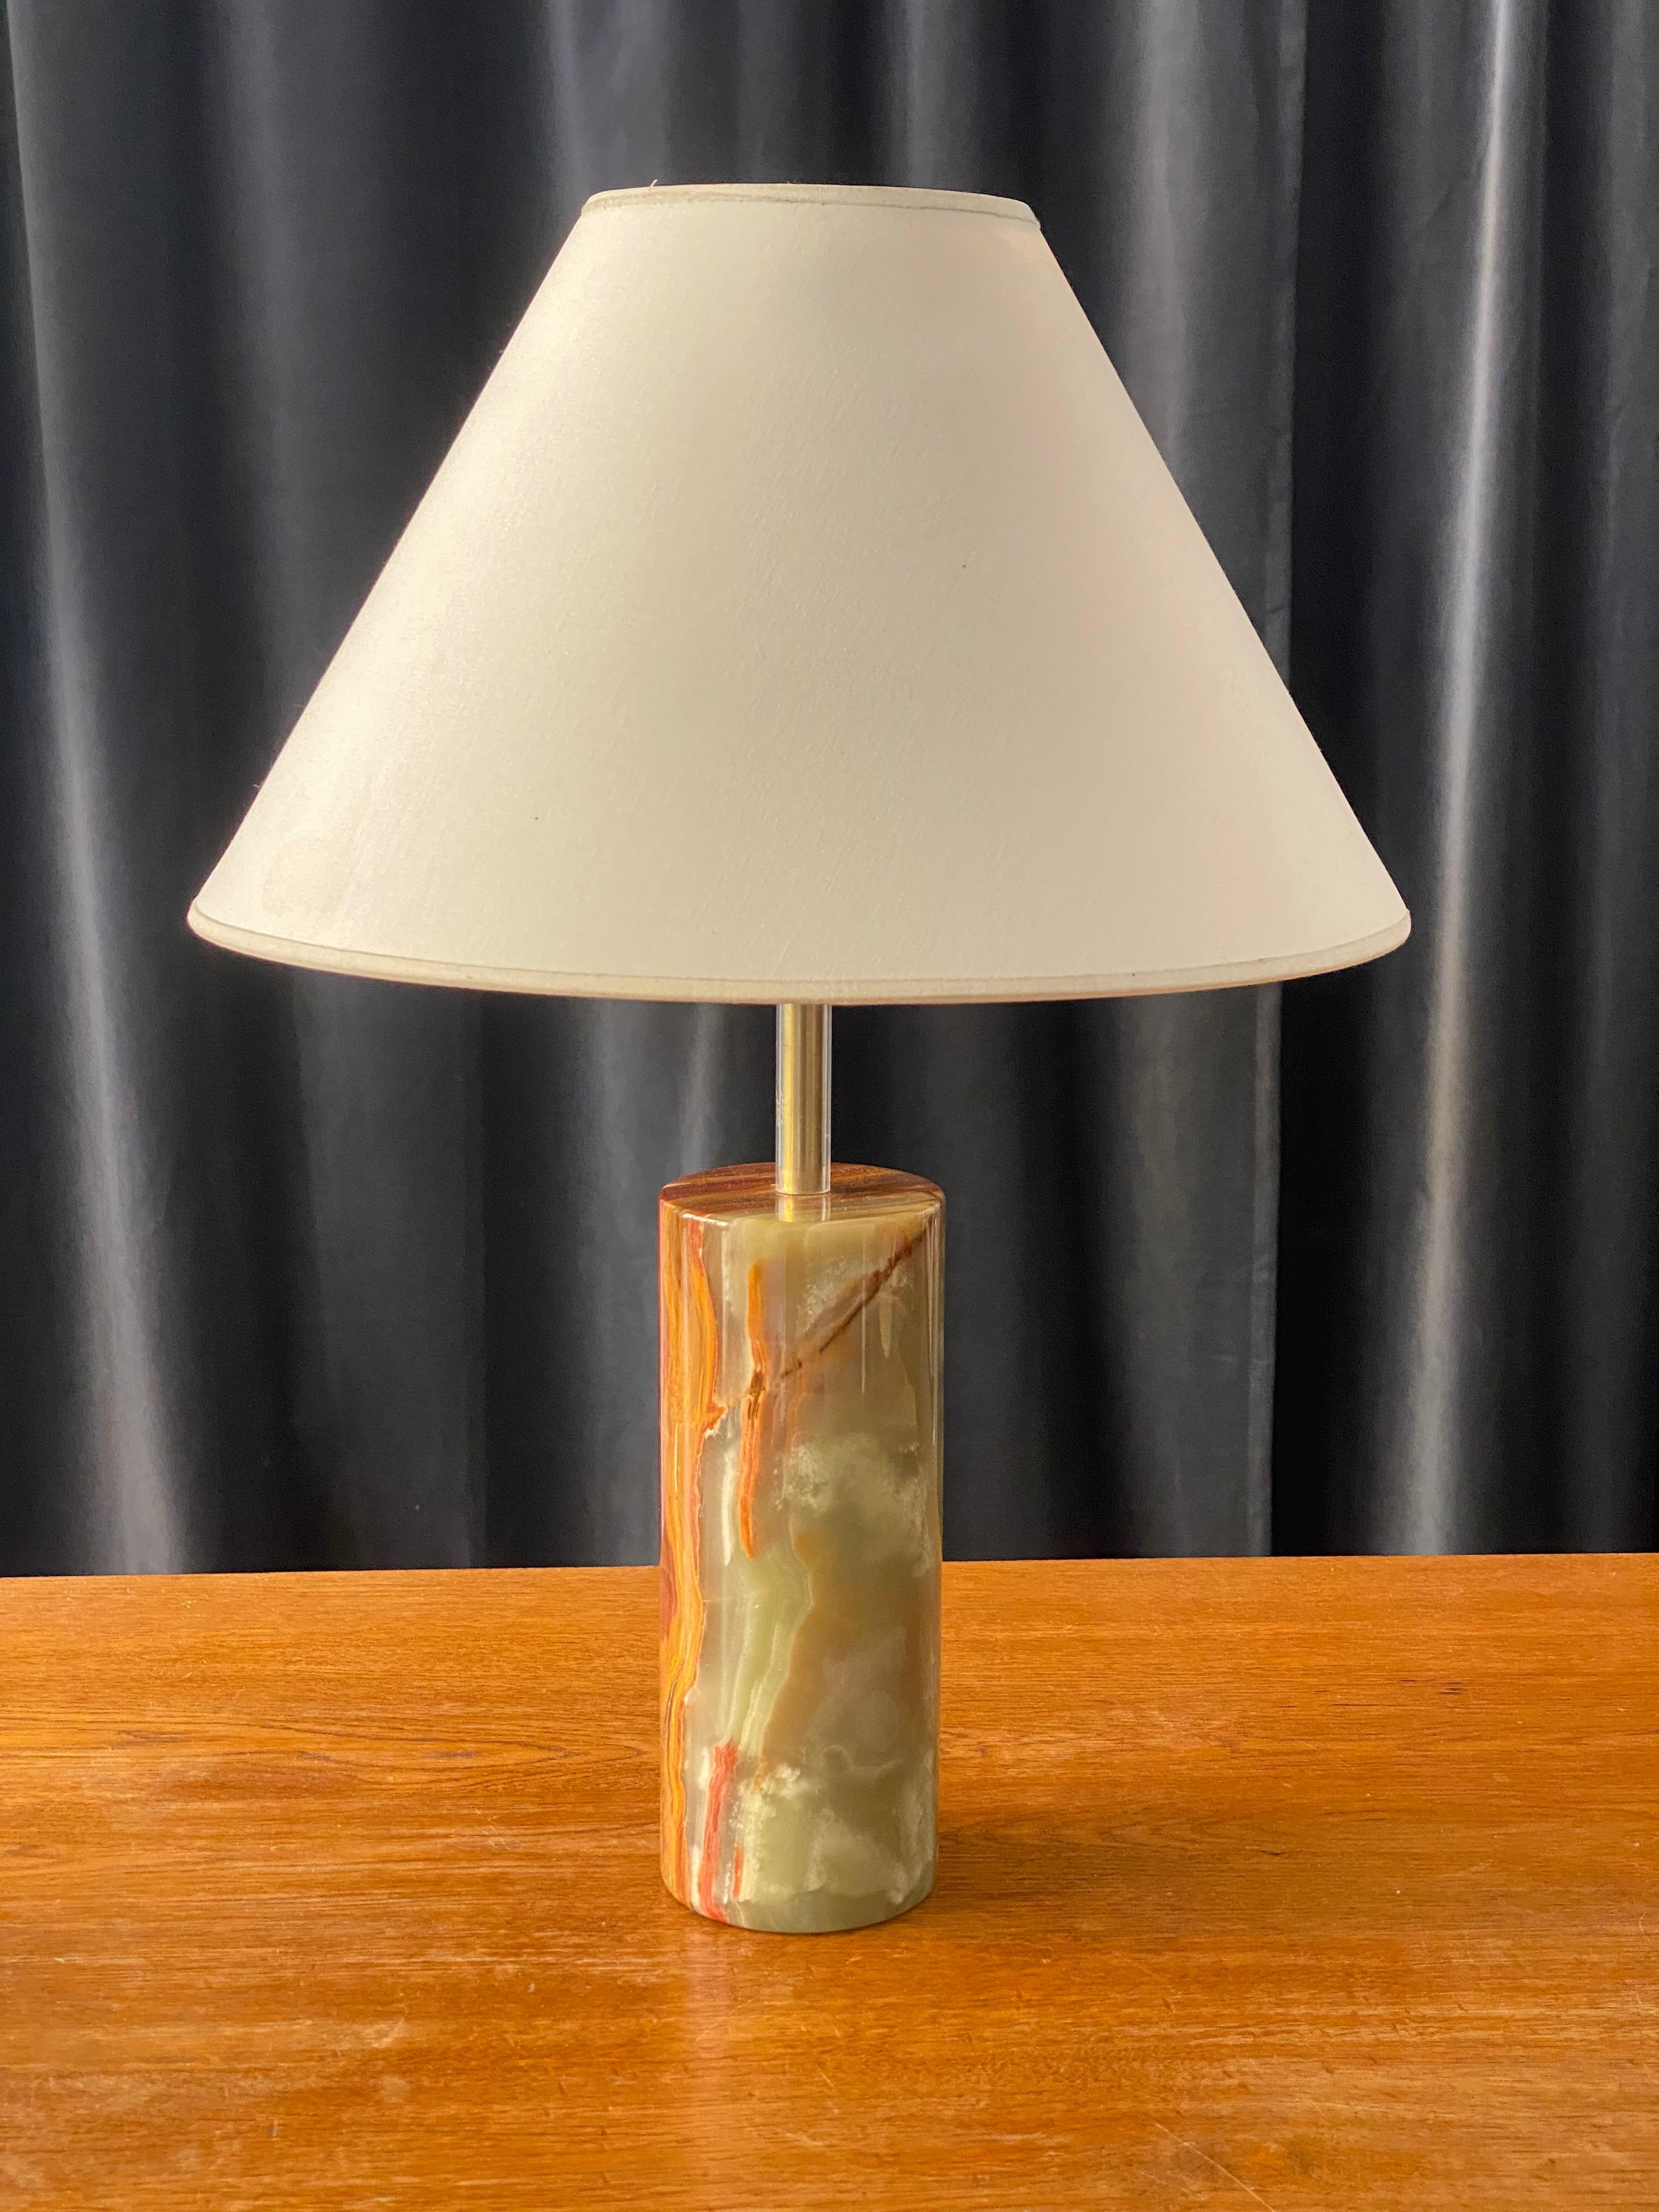 An elegant Minimalist table lamp. By an unknown Swedish designer and producer. Base in onyx, rod in brass. The vintage screen is not included purchase.